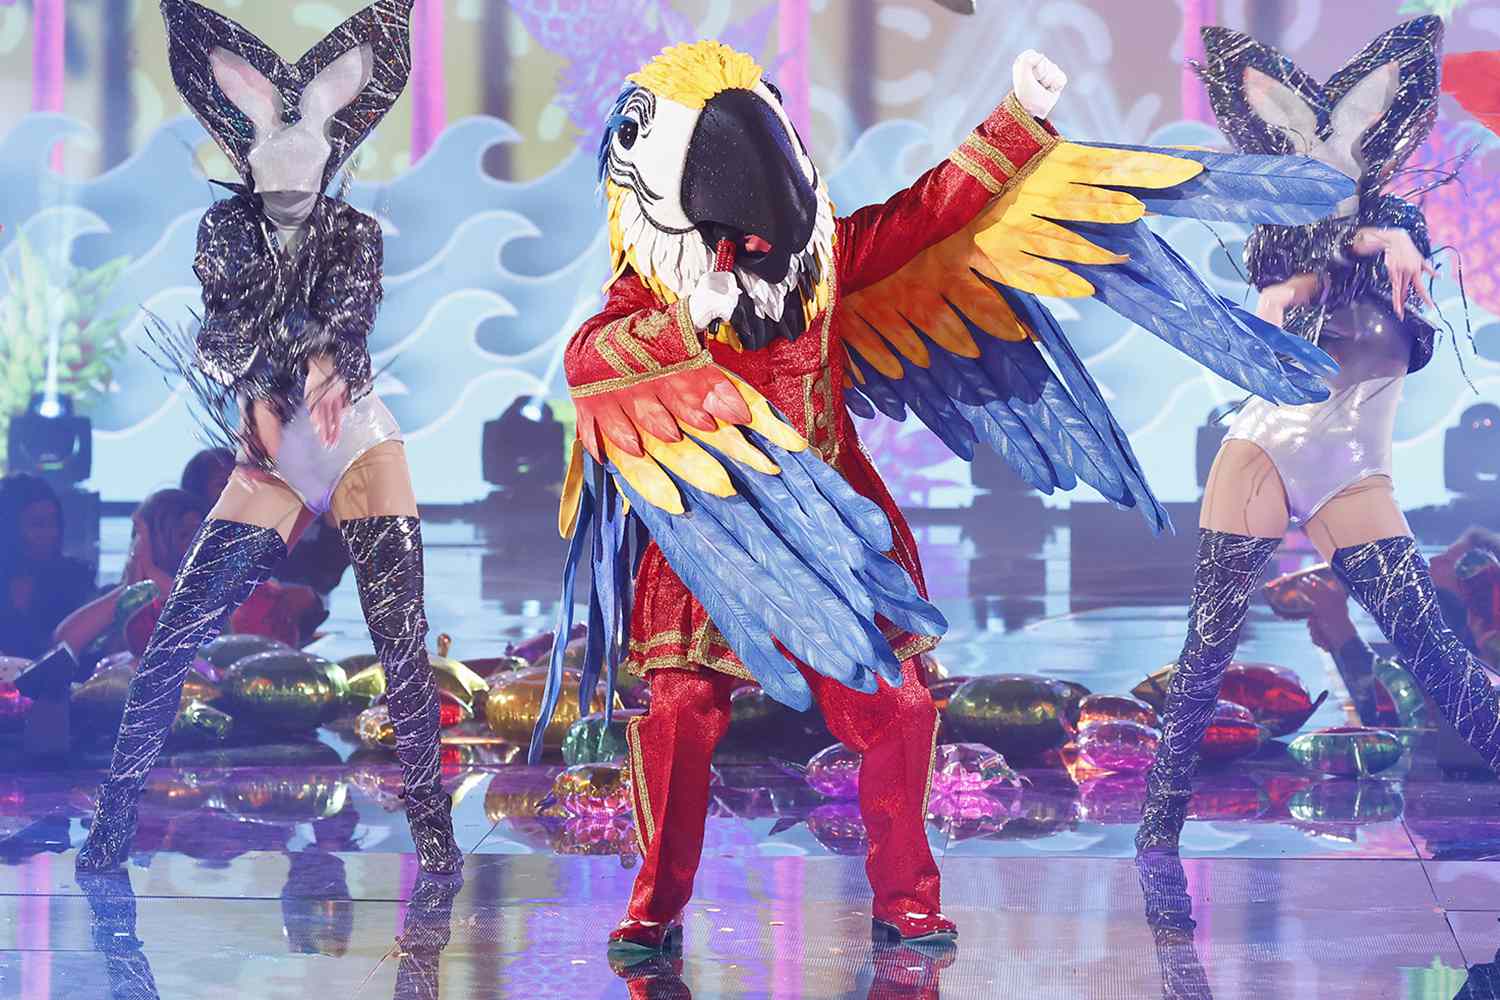 Macau in the “Semi-Finals” episode of THE MASKED SINGER